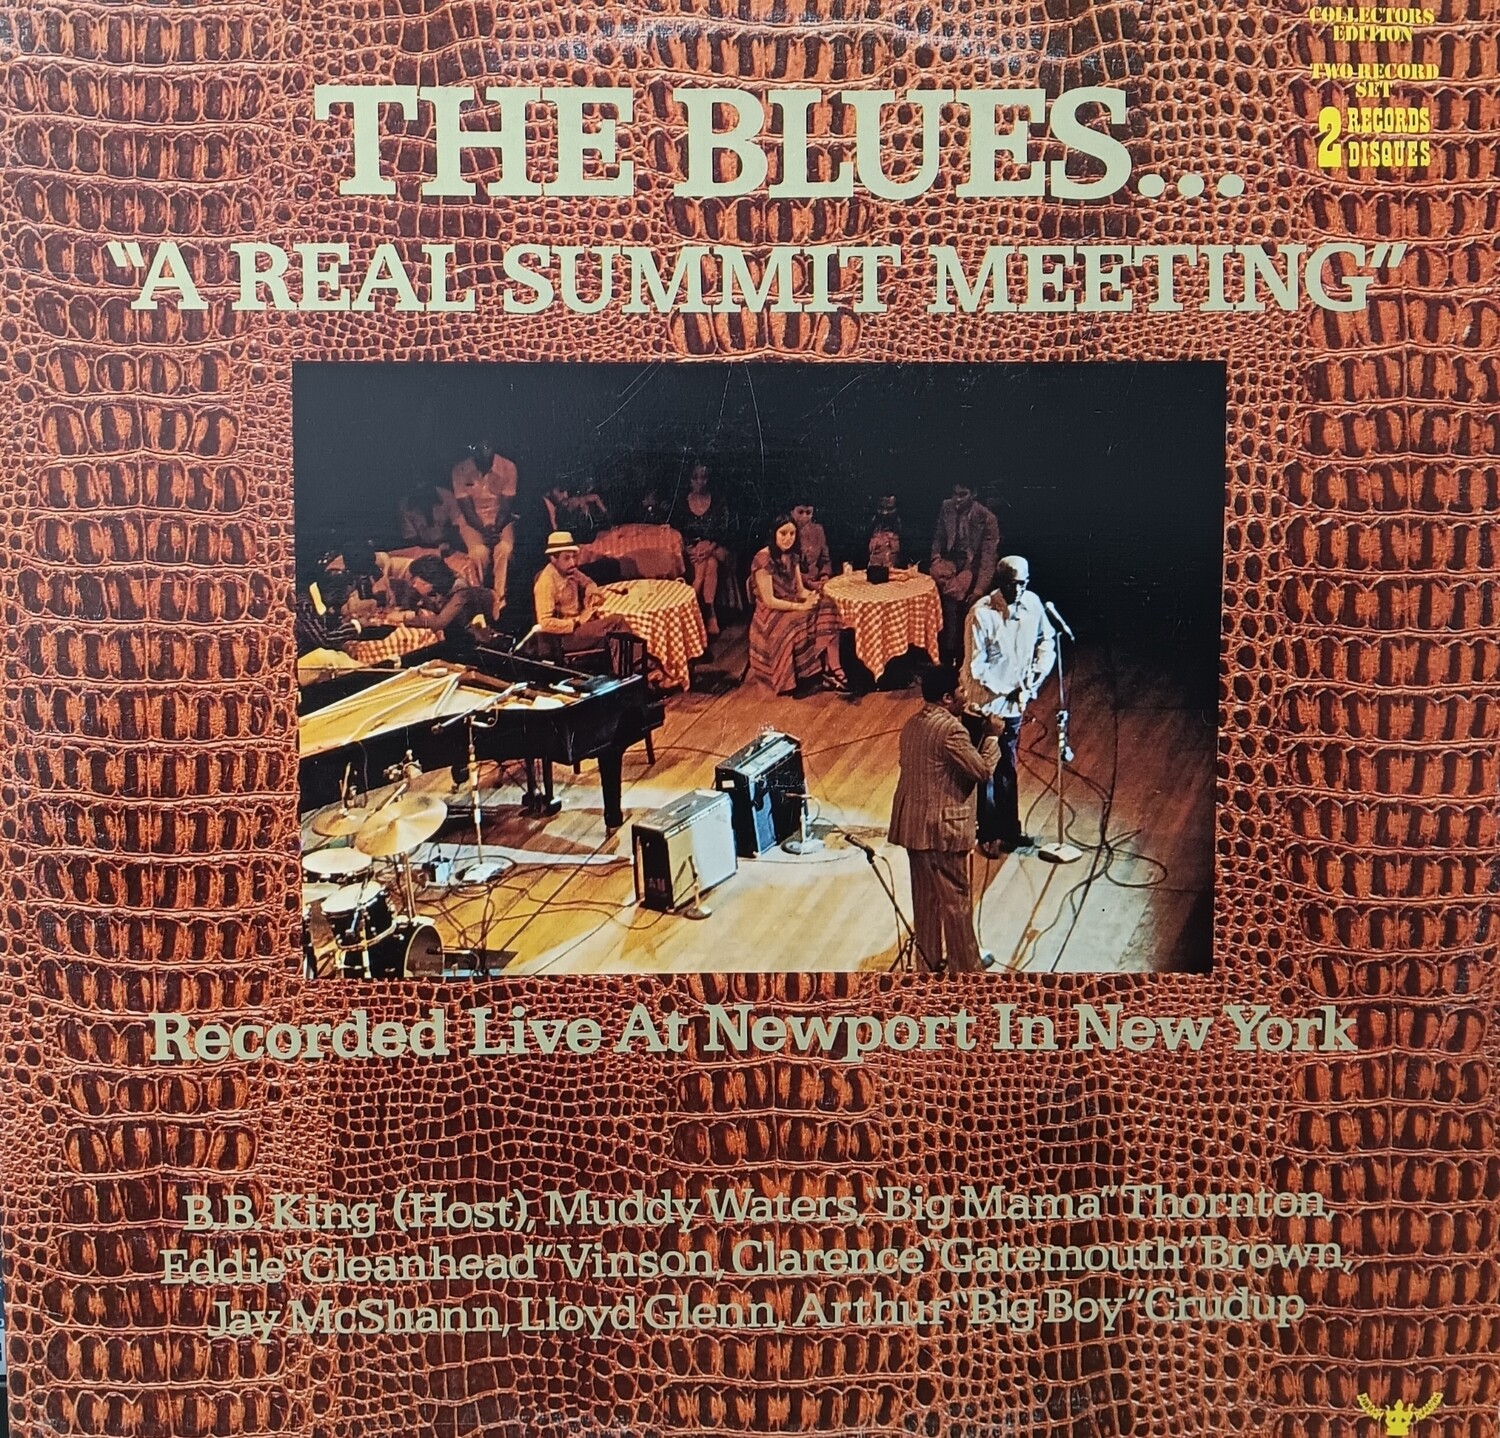 VARIOUS - The blues A real summit meeting